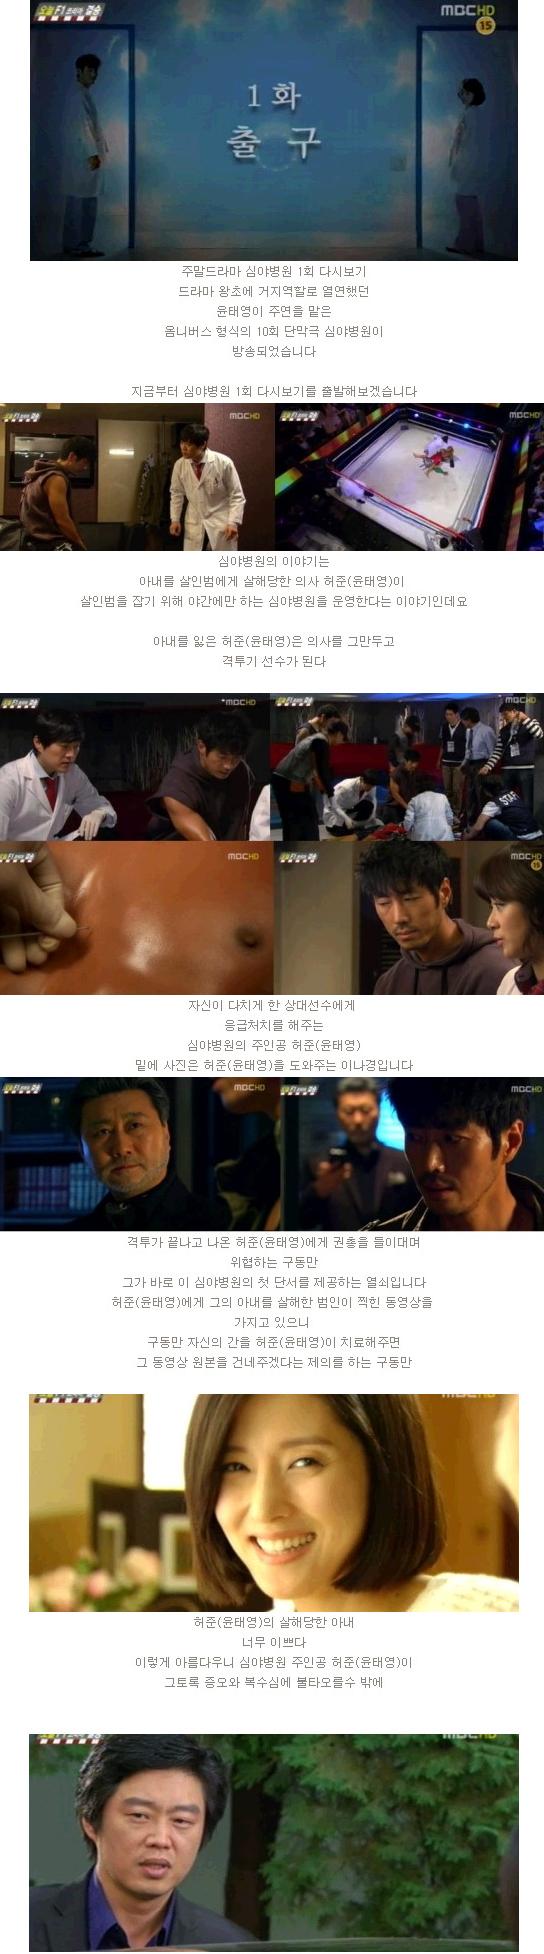 episode 1 captures for the Korean drama &quot;Night Hospital&quot;